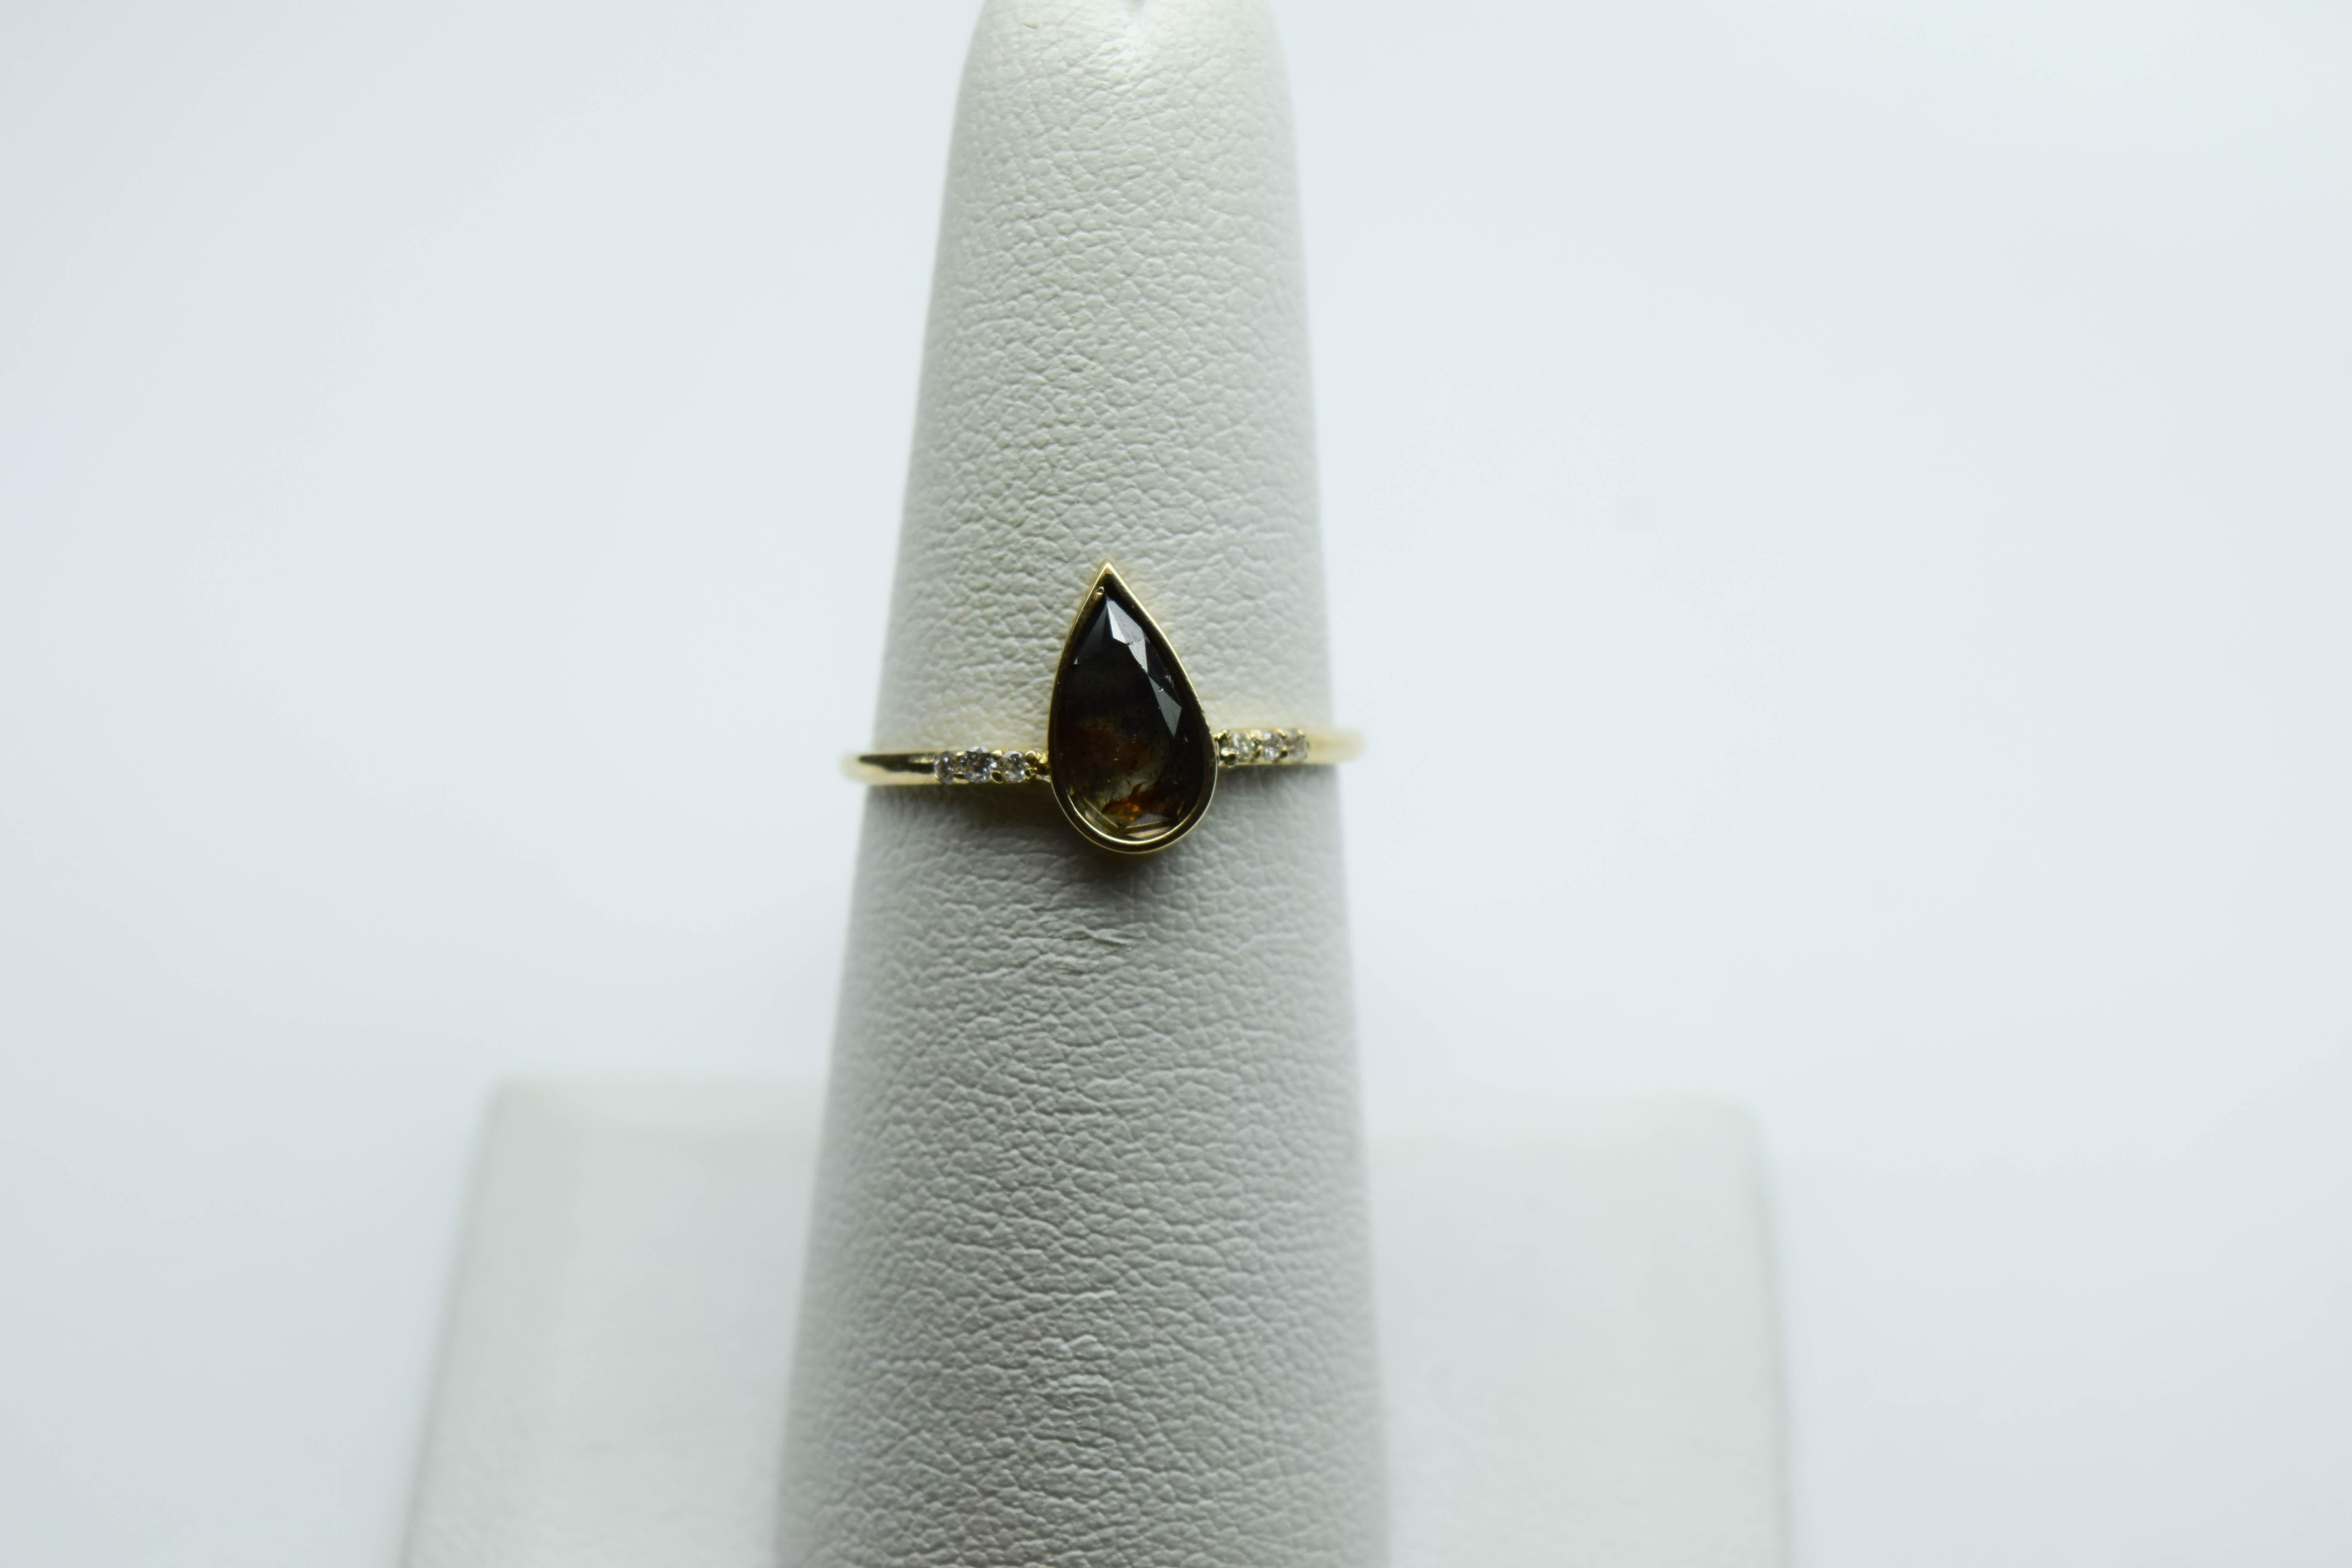 
Stunning one of a kind pear shape daimond ring made in yellow gold, this is not your classical ring, the stone is a natural black diamond the pattern inside the diamond is so mysterious and cannot be easily found in other rings. I love natural